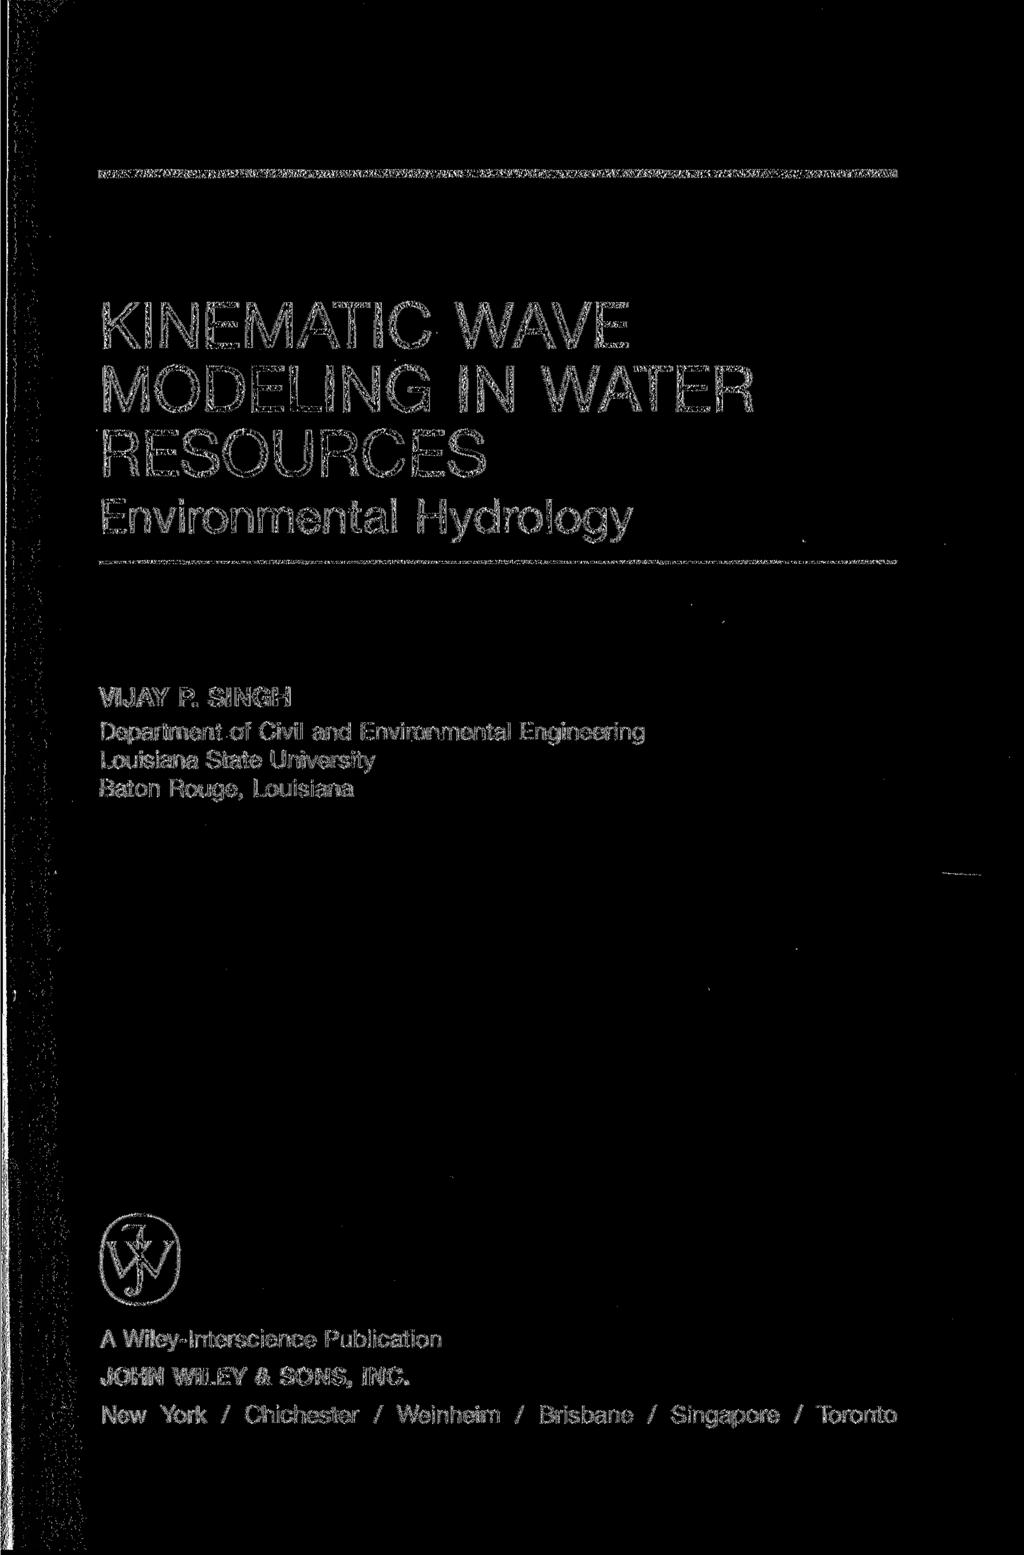 KINEMATIC WAVE MODELING IN WATER RESOURCES Environmental Hydrology VIJAY P.